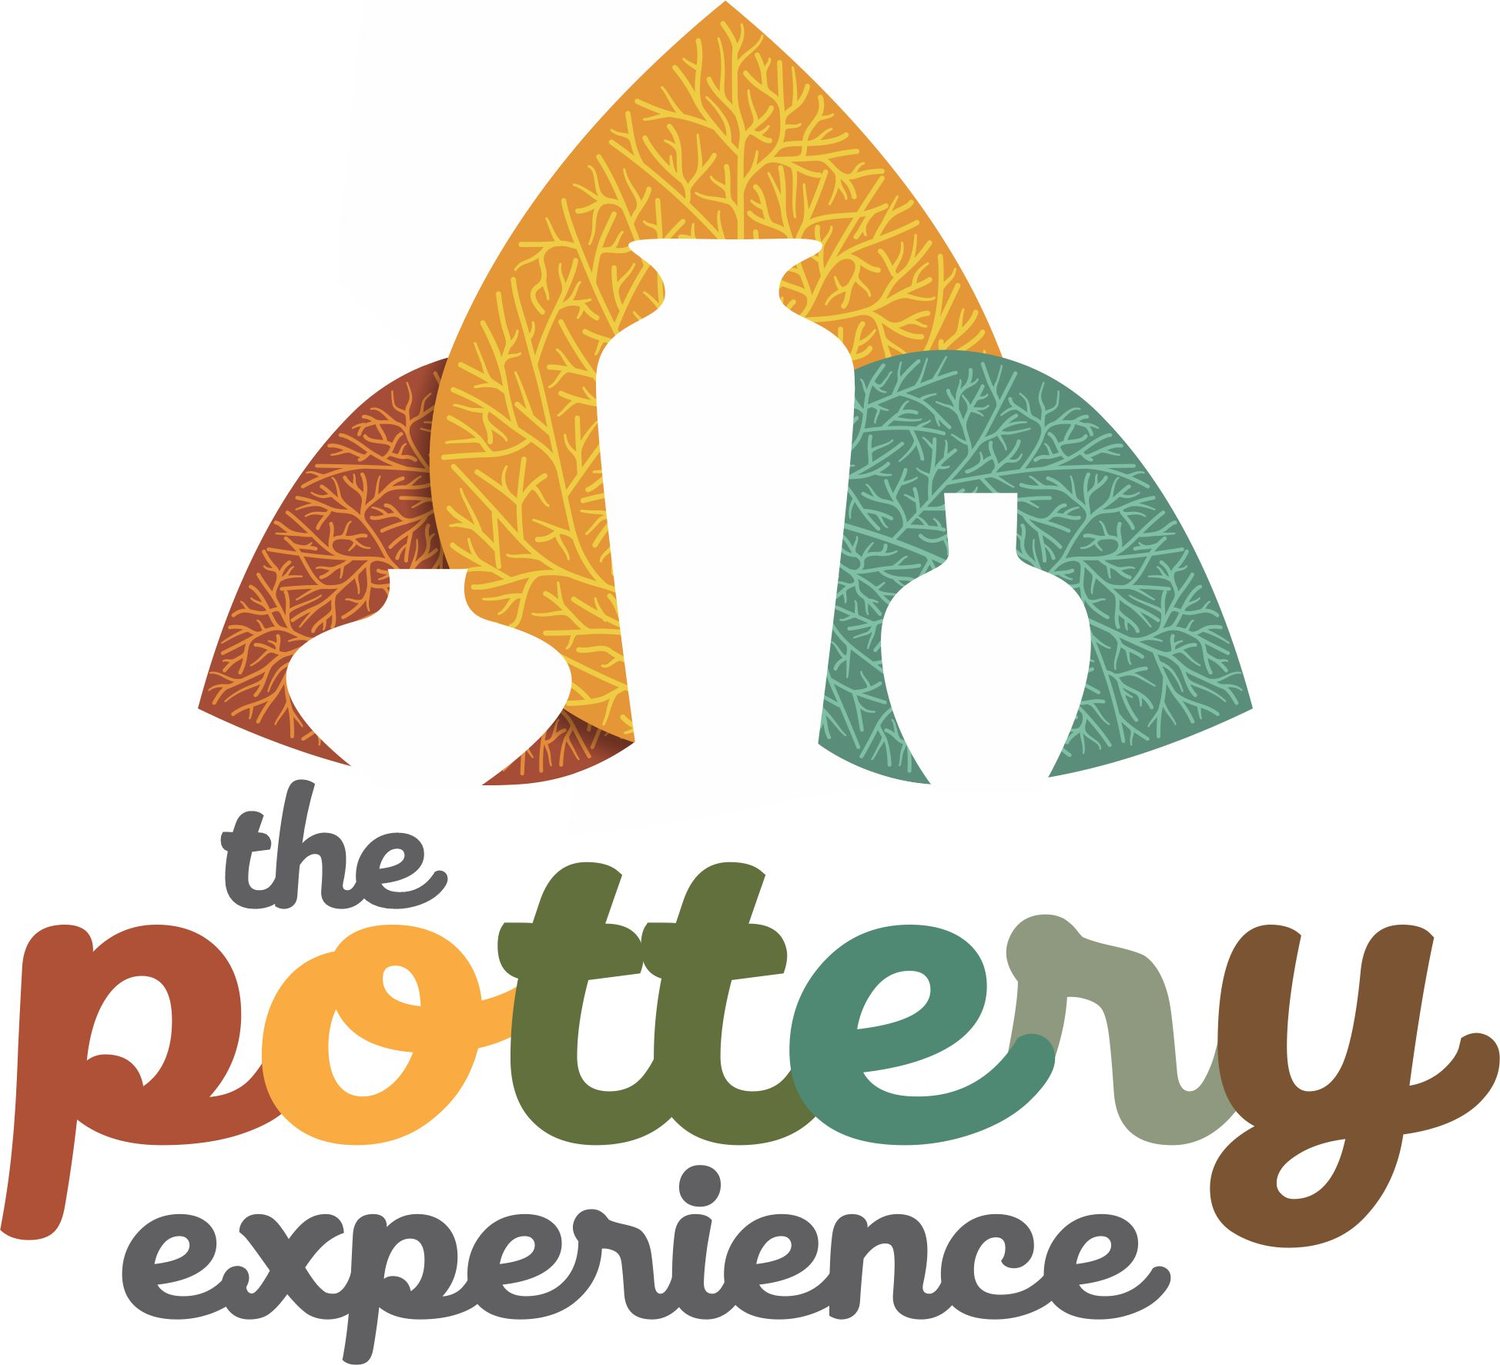 The Pottery Experience